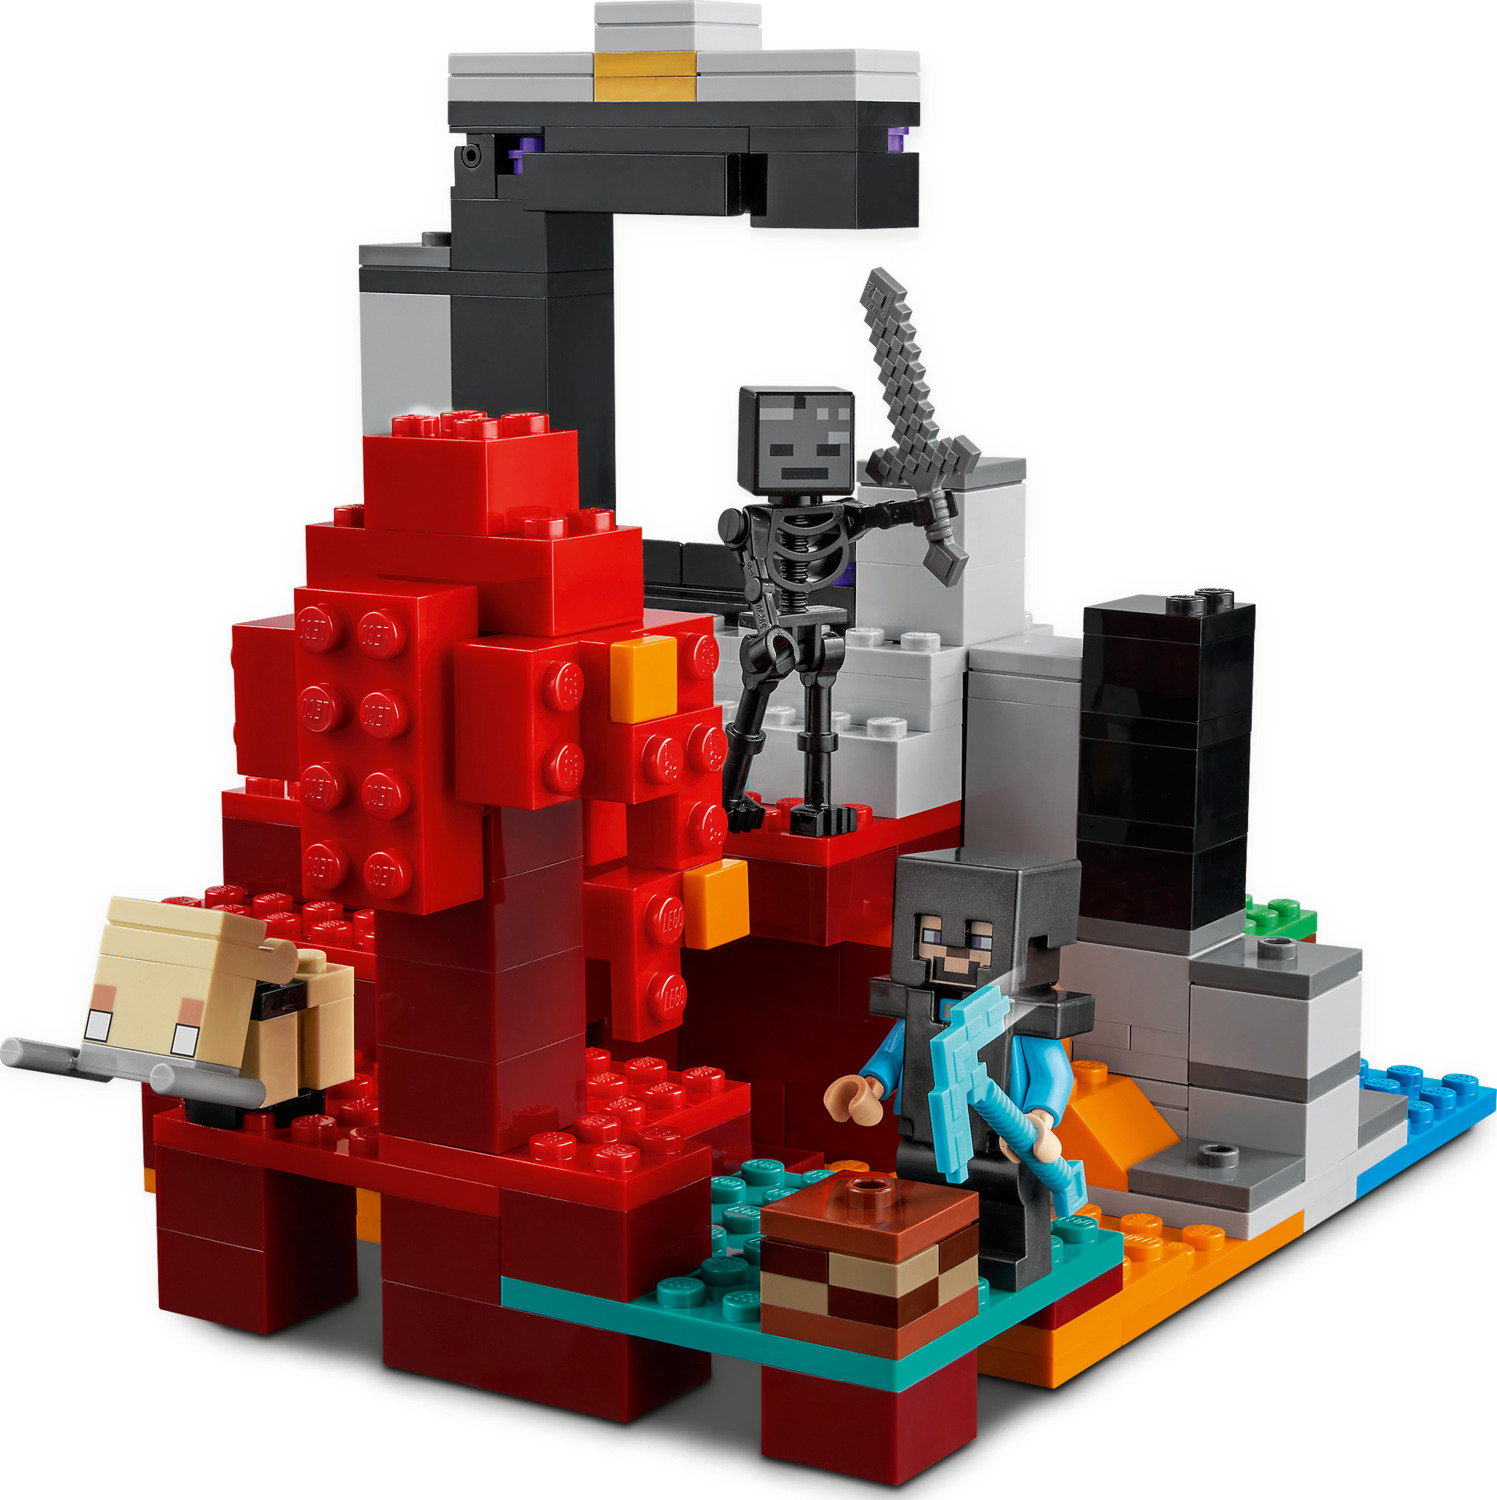 Lego Ruined Portal - The Toy Box